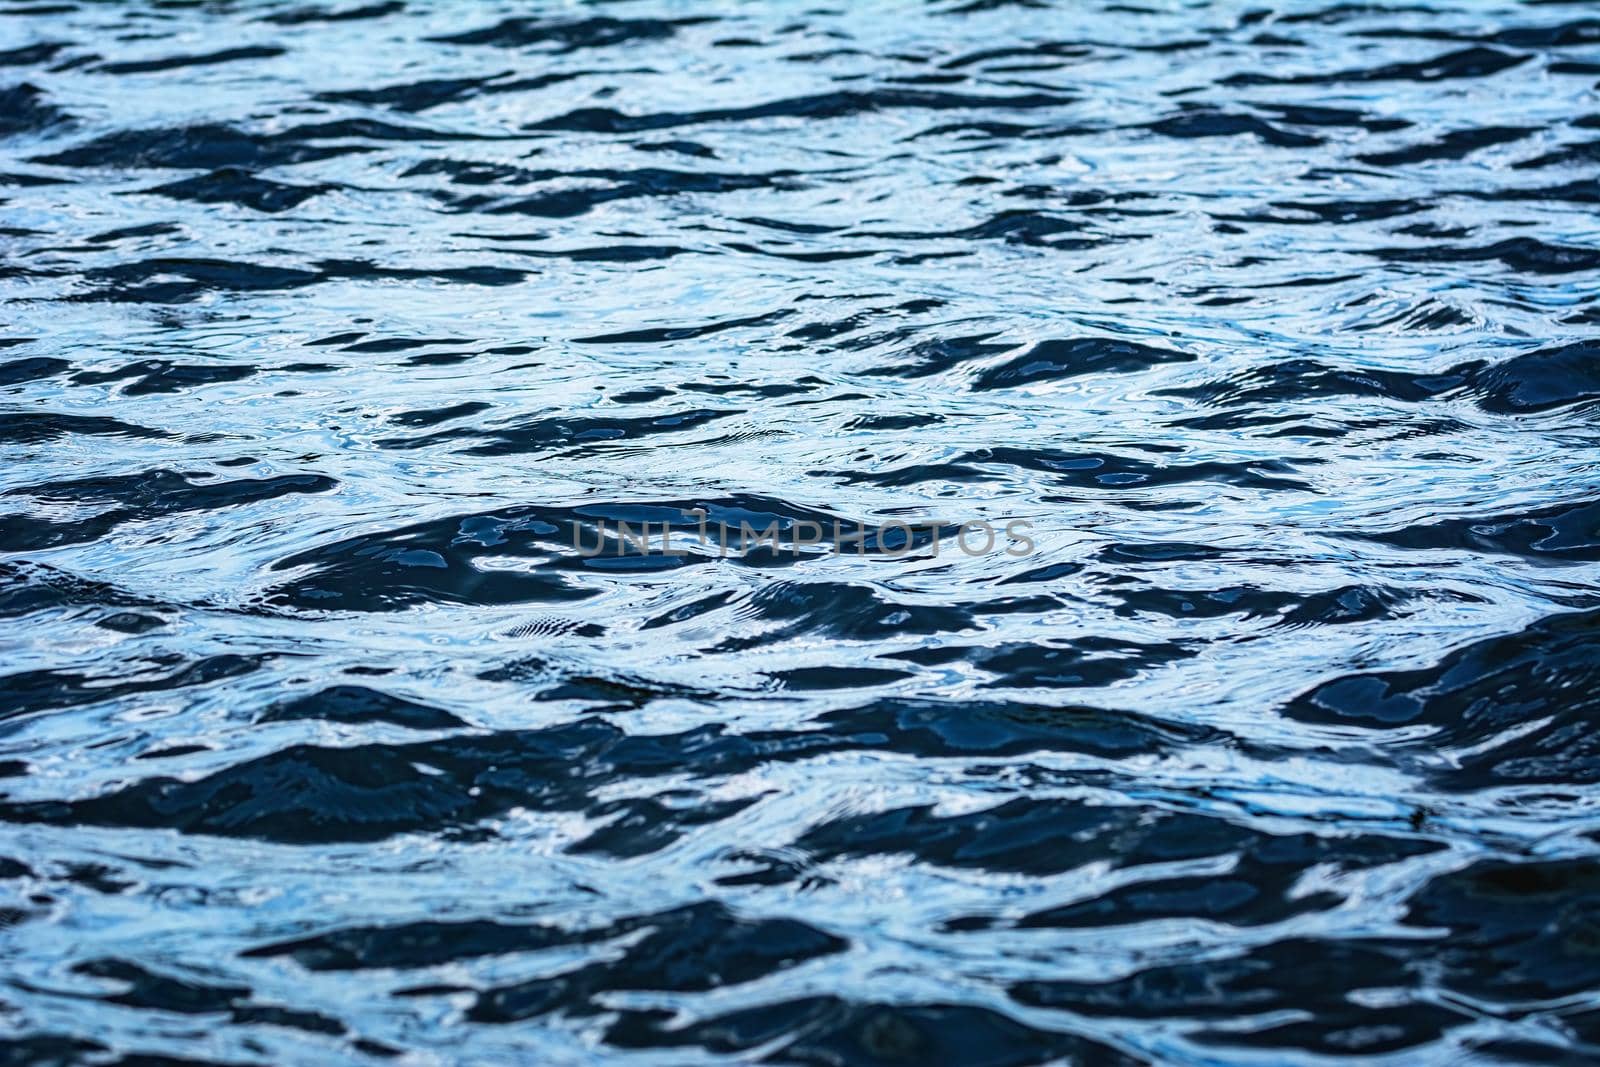 Ripple on the water surfaice.
Abstract background